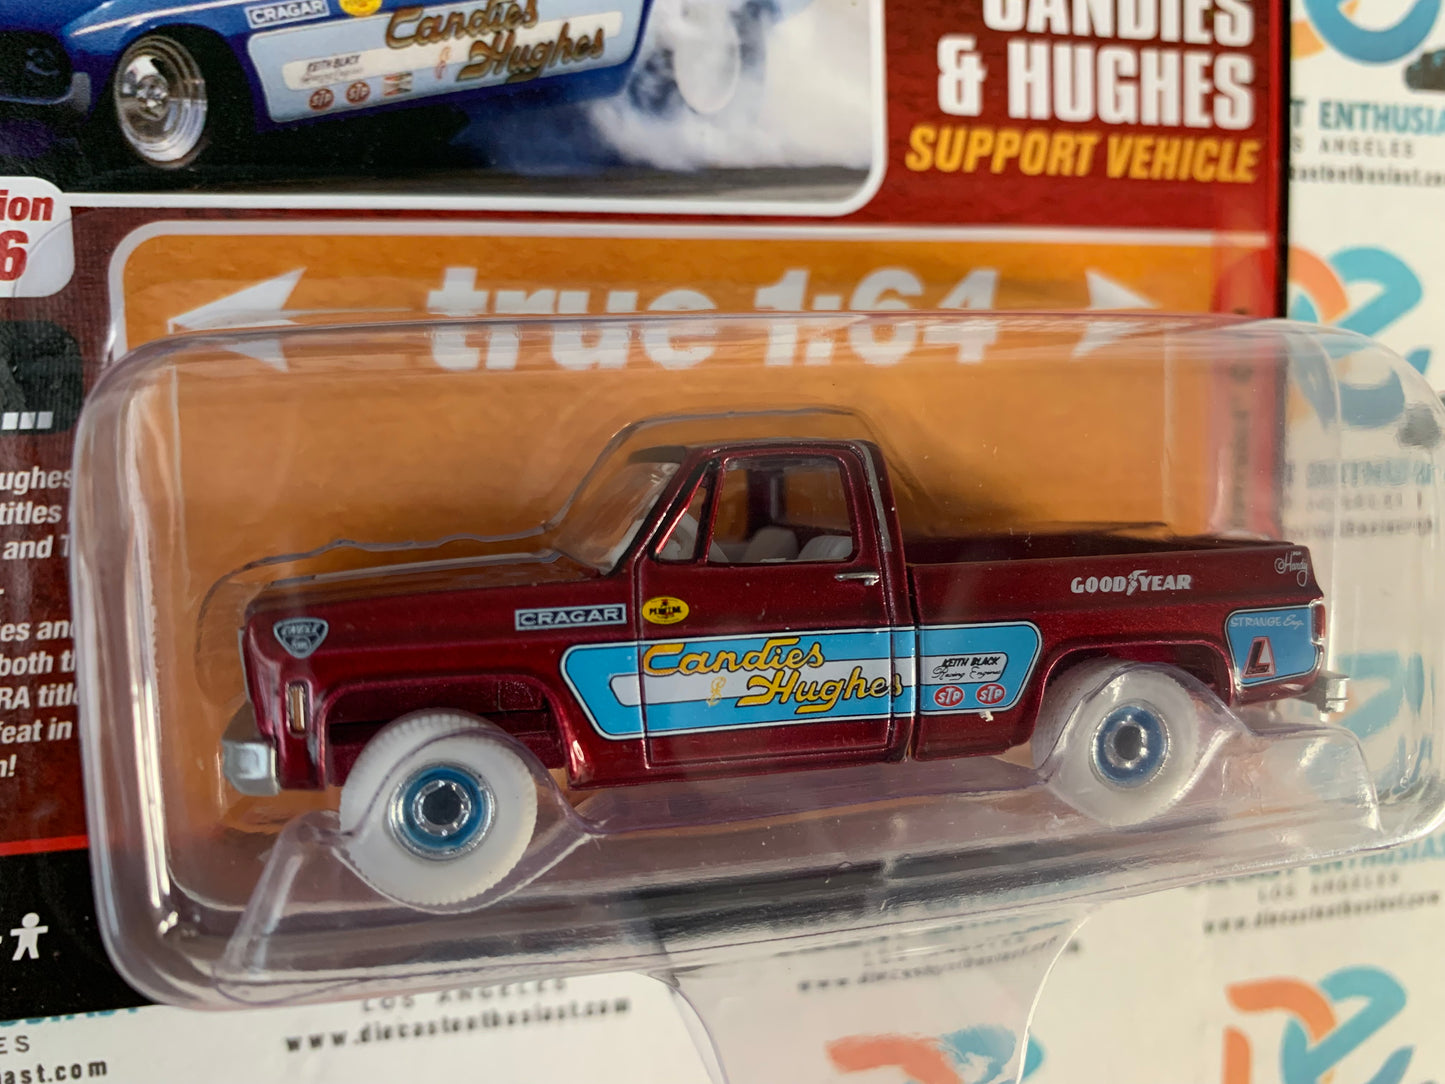 CHASE ULTRA RED Auto World Racing Legends Exclusives Candies & Hughes 1973 Chevrolet C10 1:64